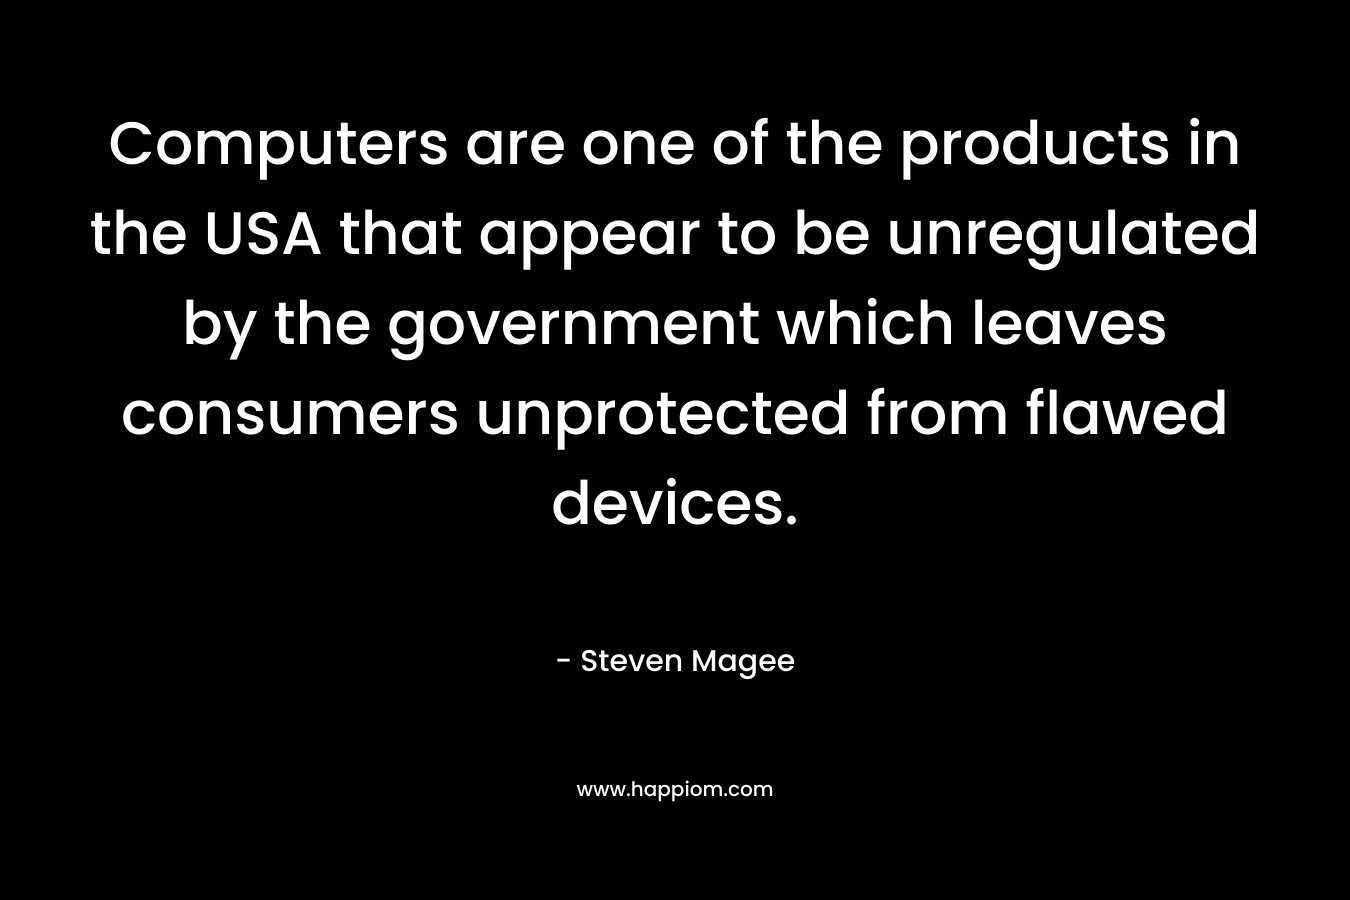 Computers are one of the products in the USA that appear to be unregulated by the government which leaves consumers unprotected from flawed devices. – Steven Magee